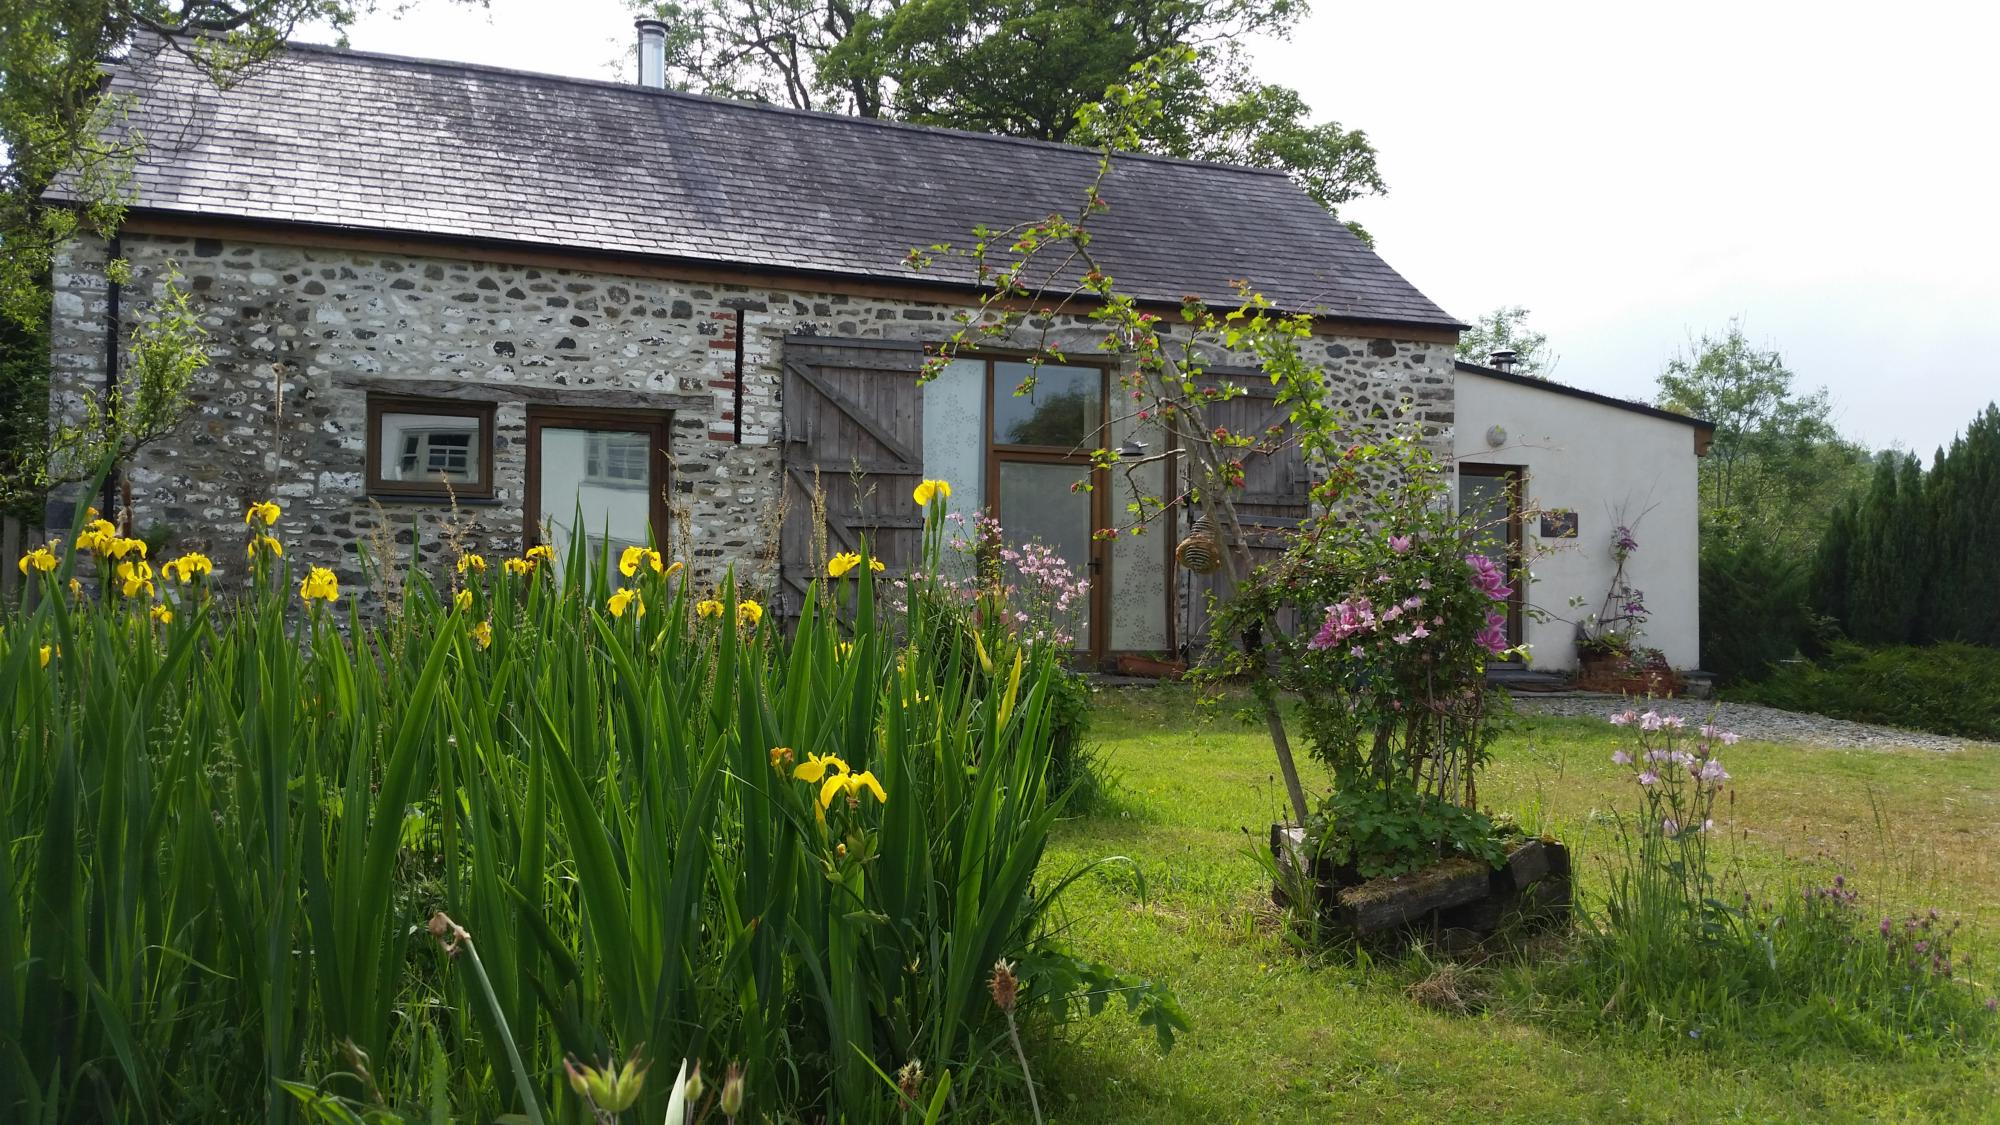 Self-Catering in South Wales holidays at Cool Places